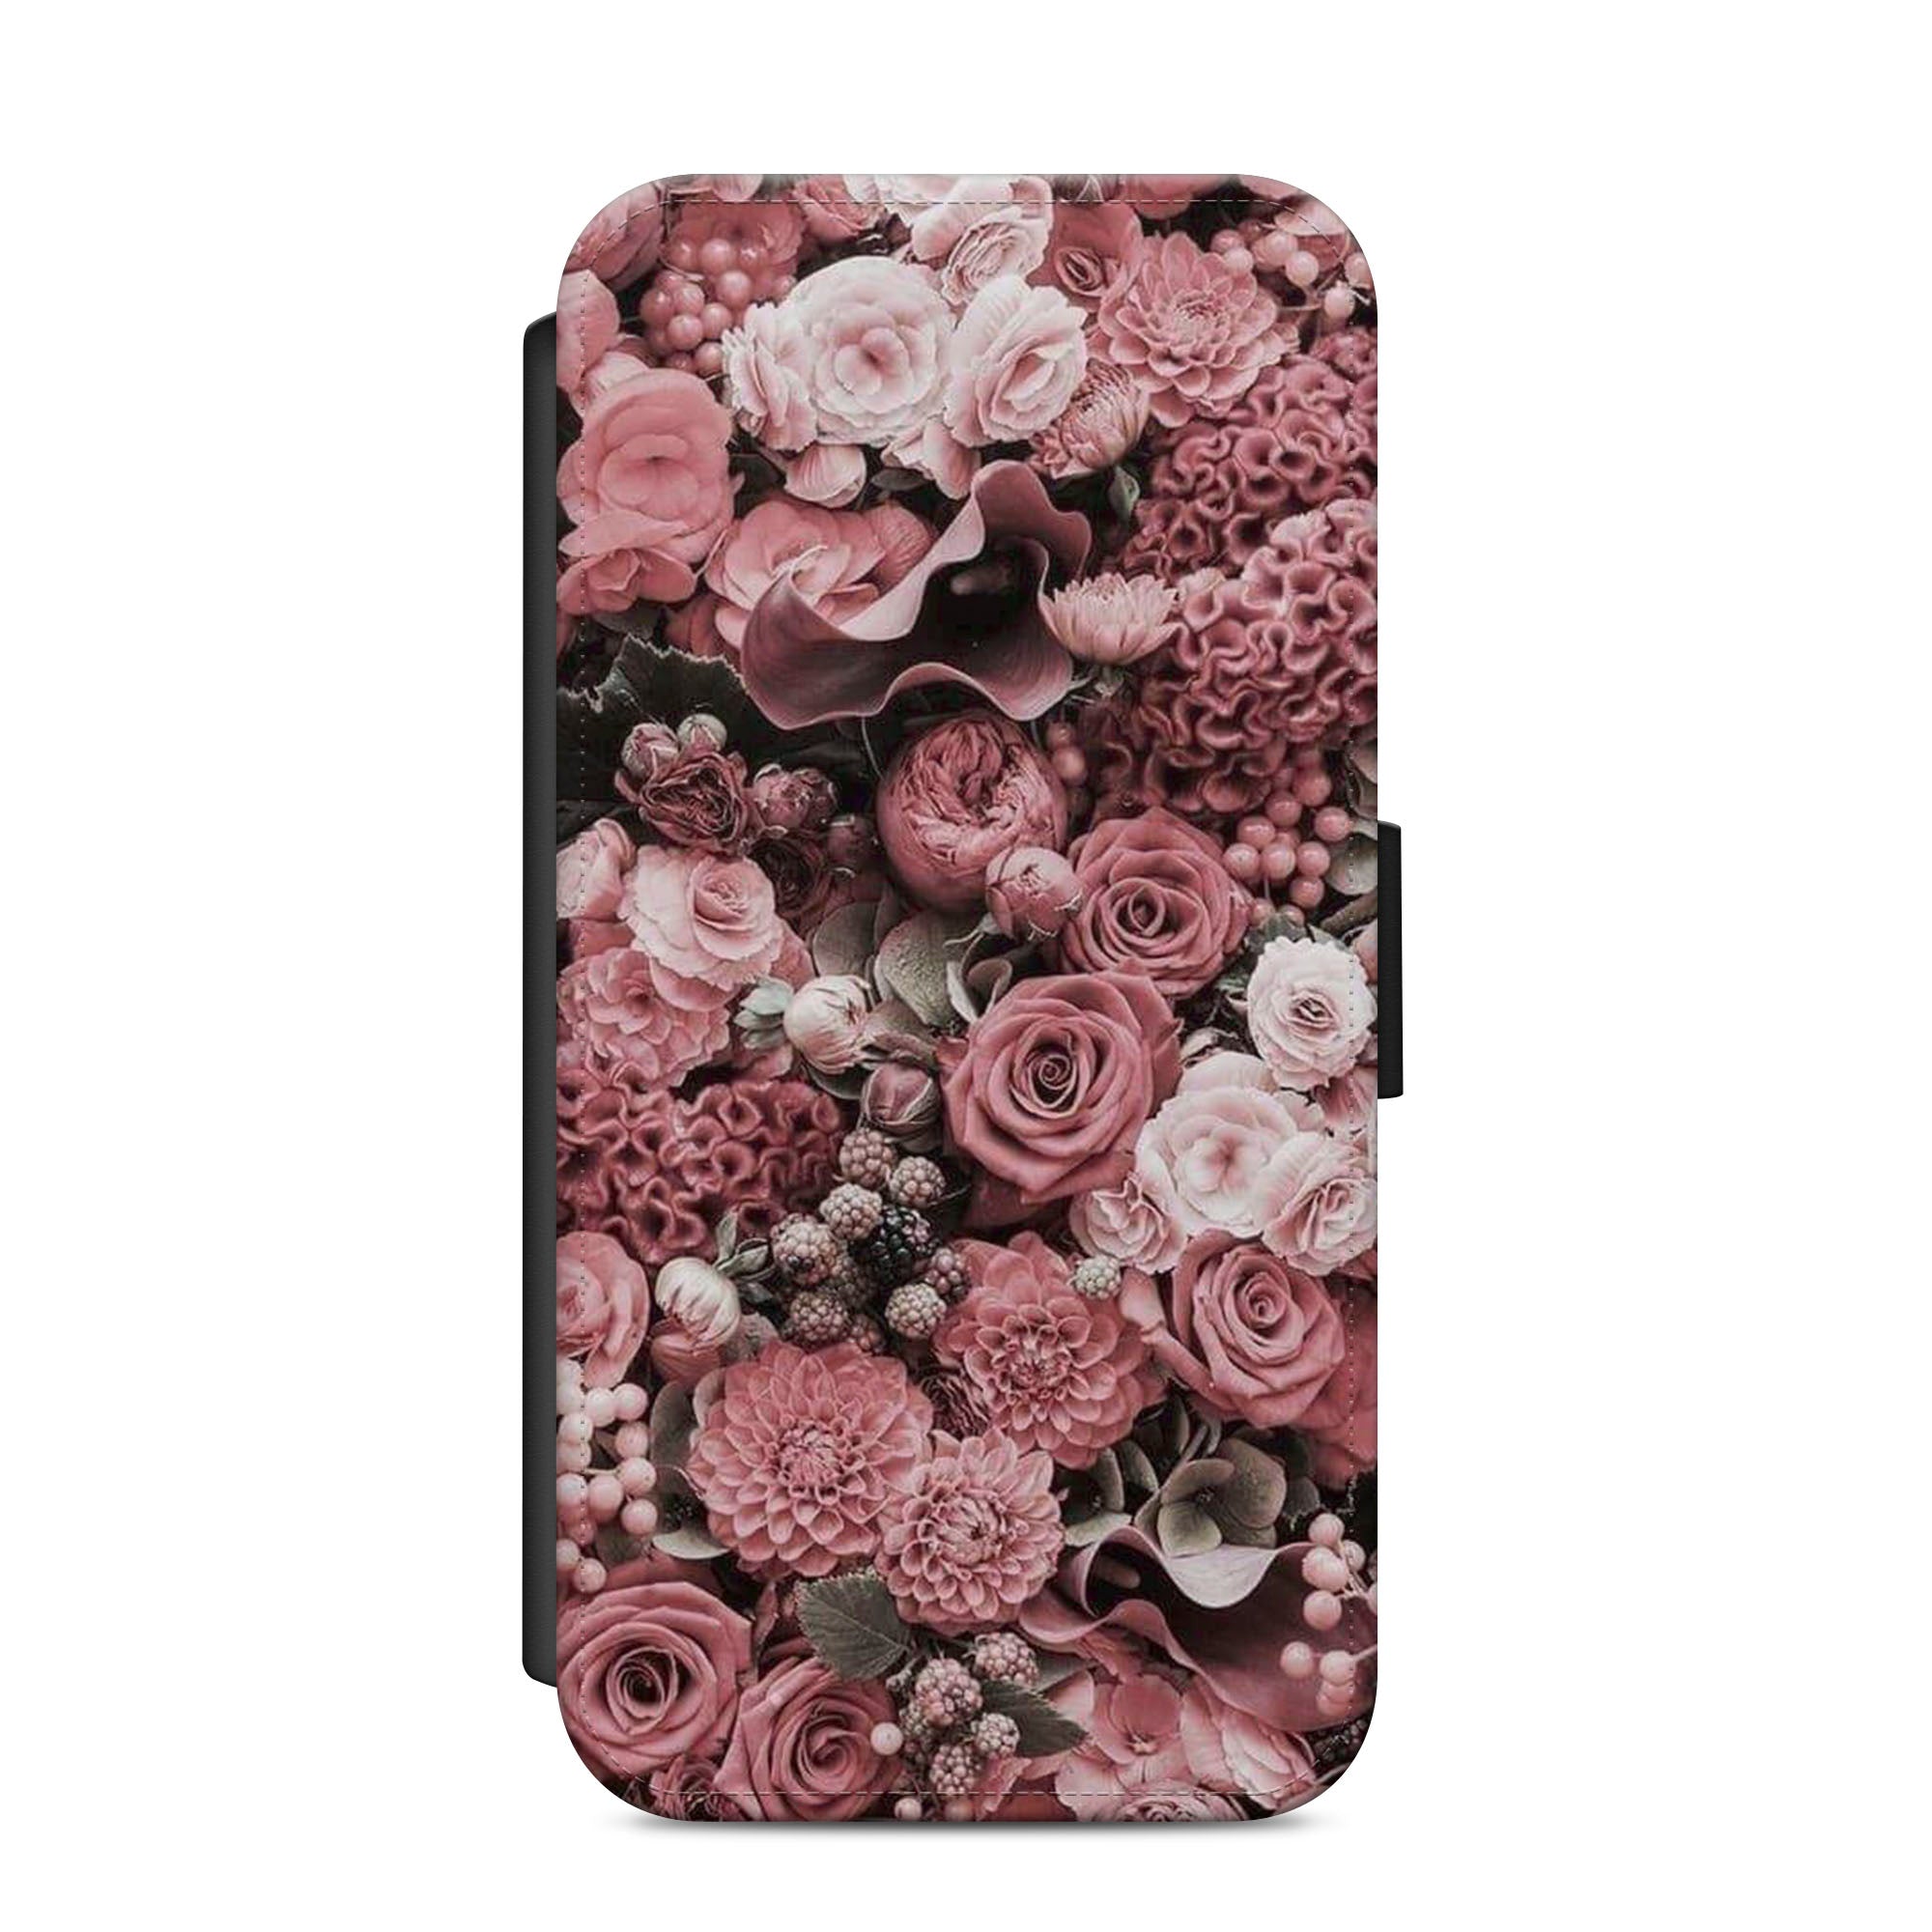 Flowers Floral Faux Leather Flip Case Wallet for iPhone / Samsung